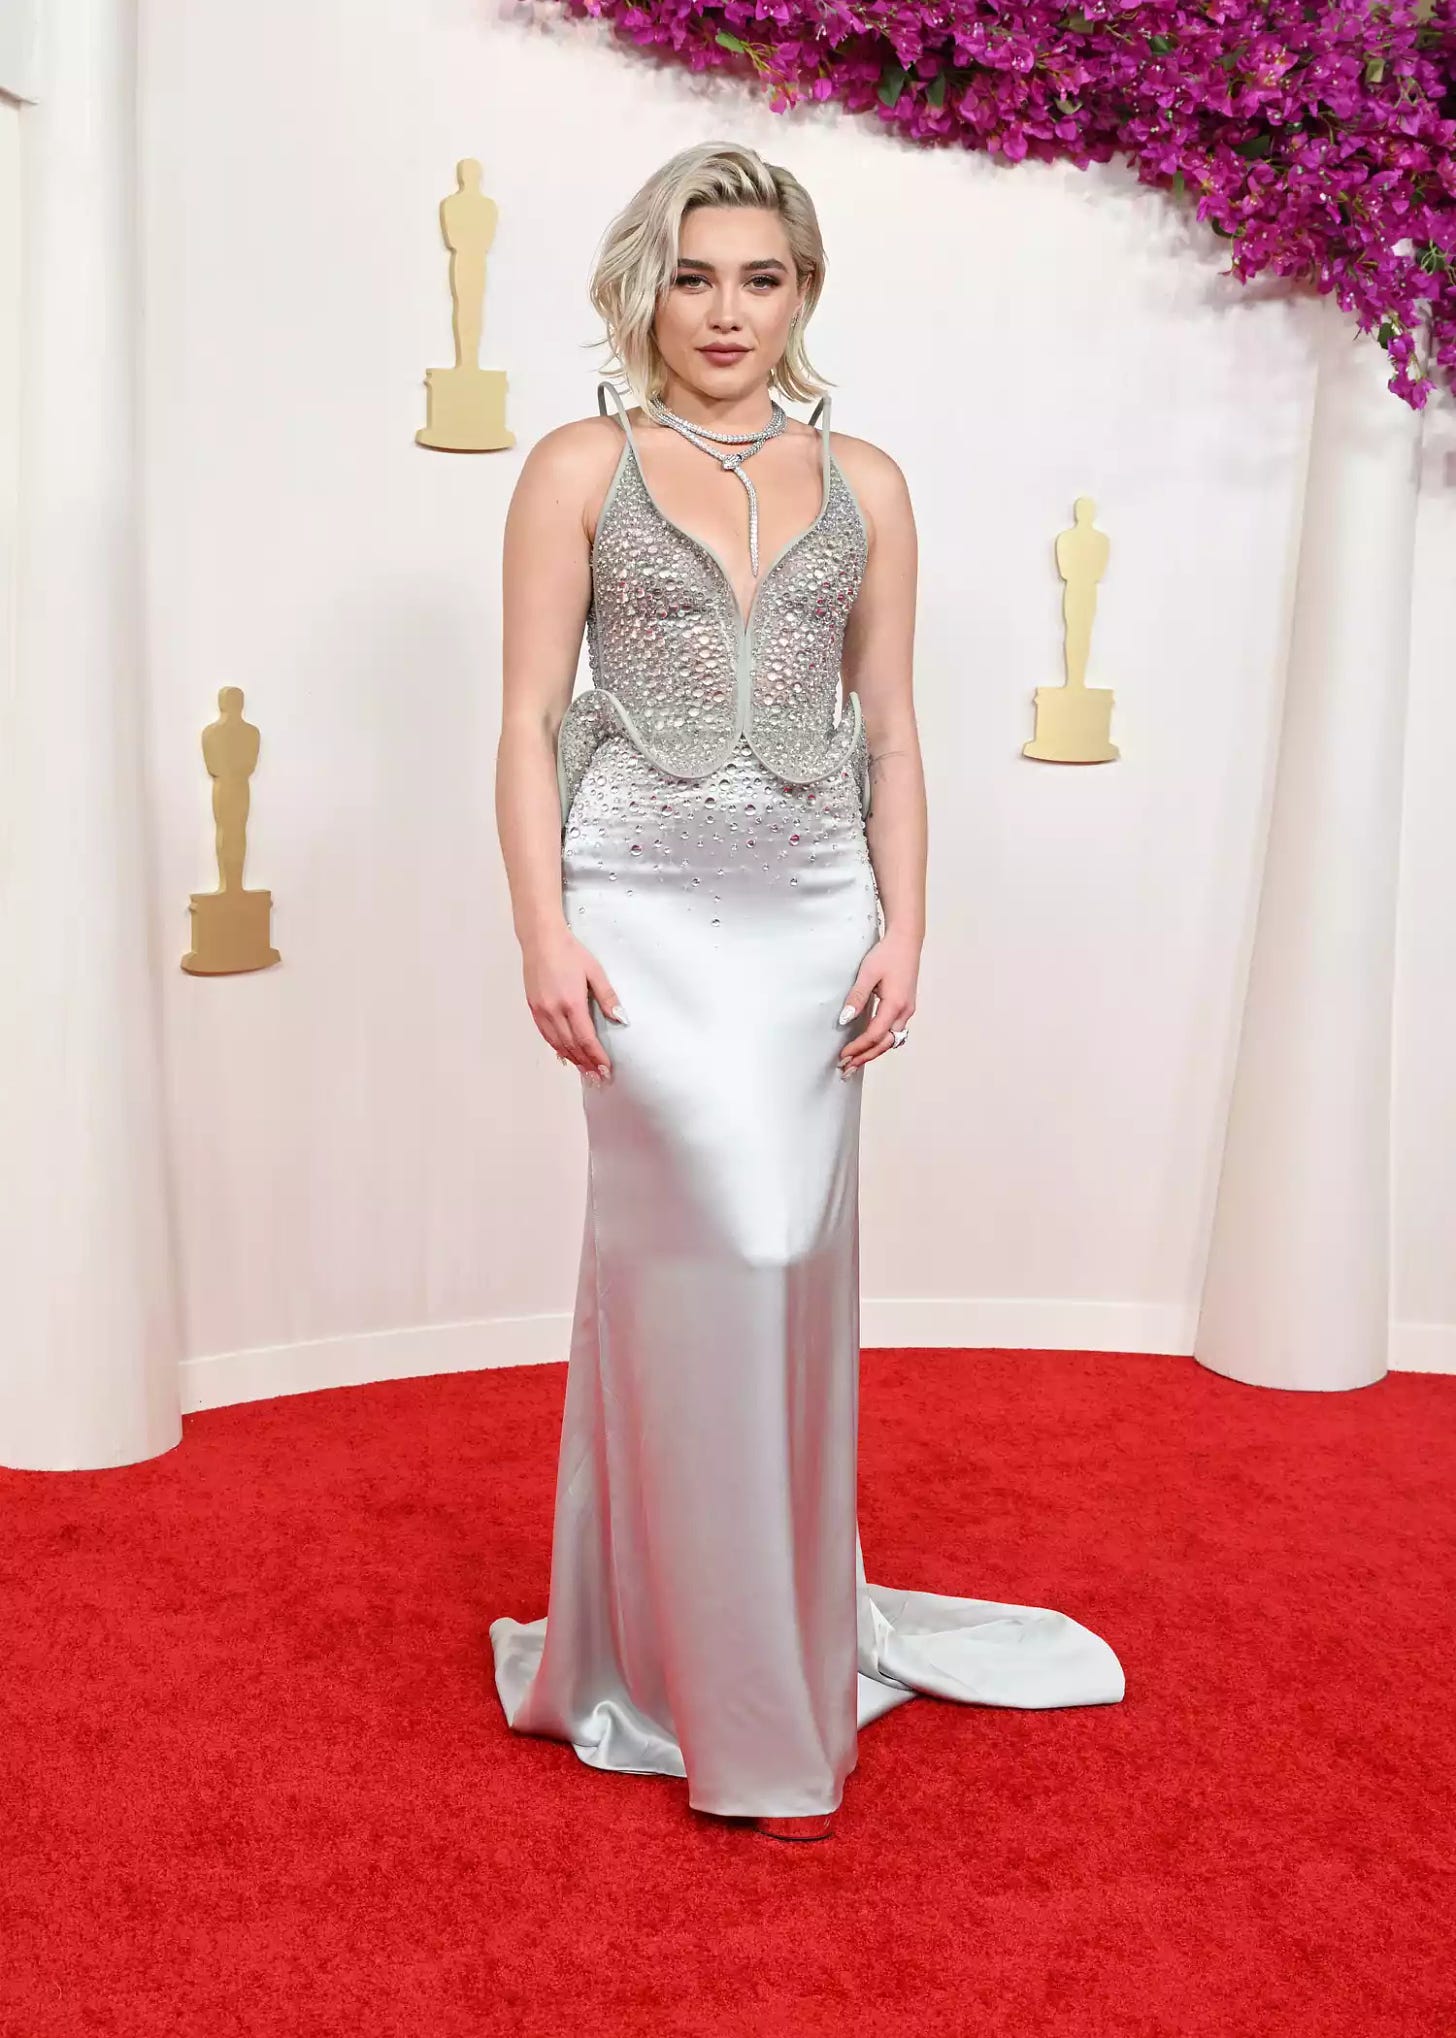 Florence Pugh in bejeweled silver corset dress